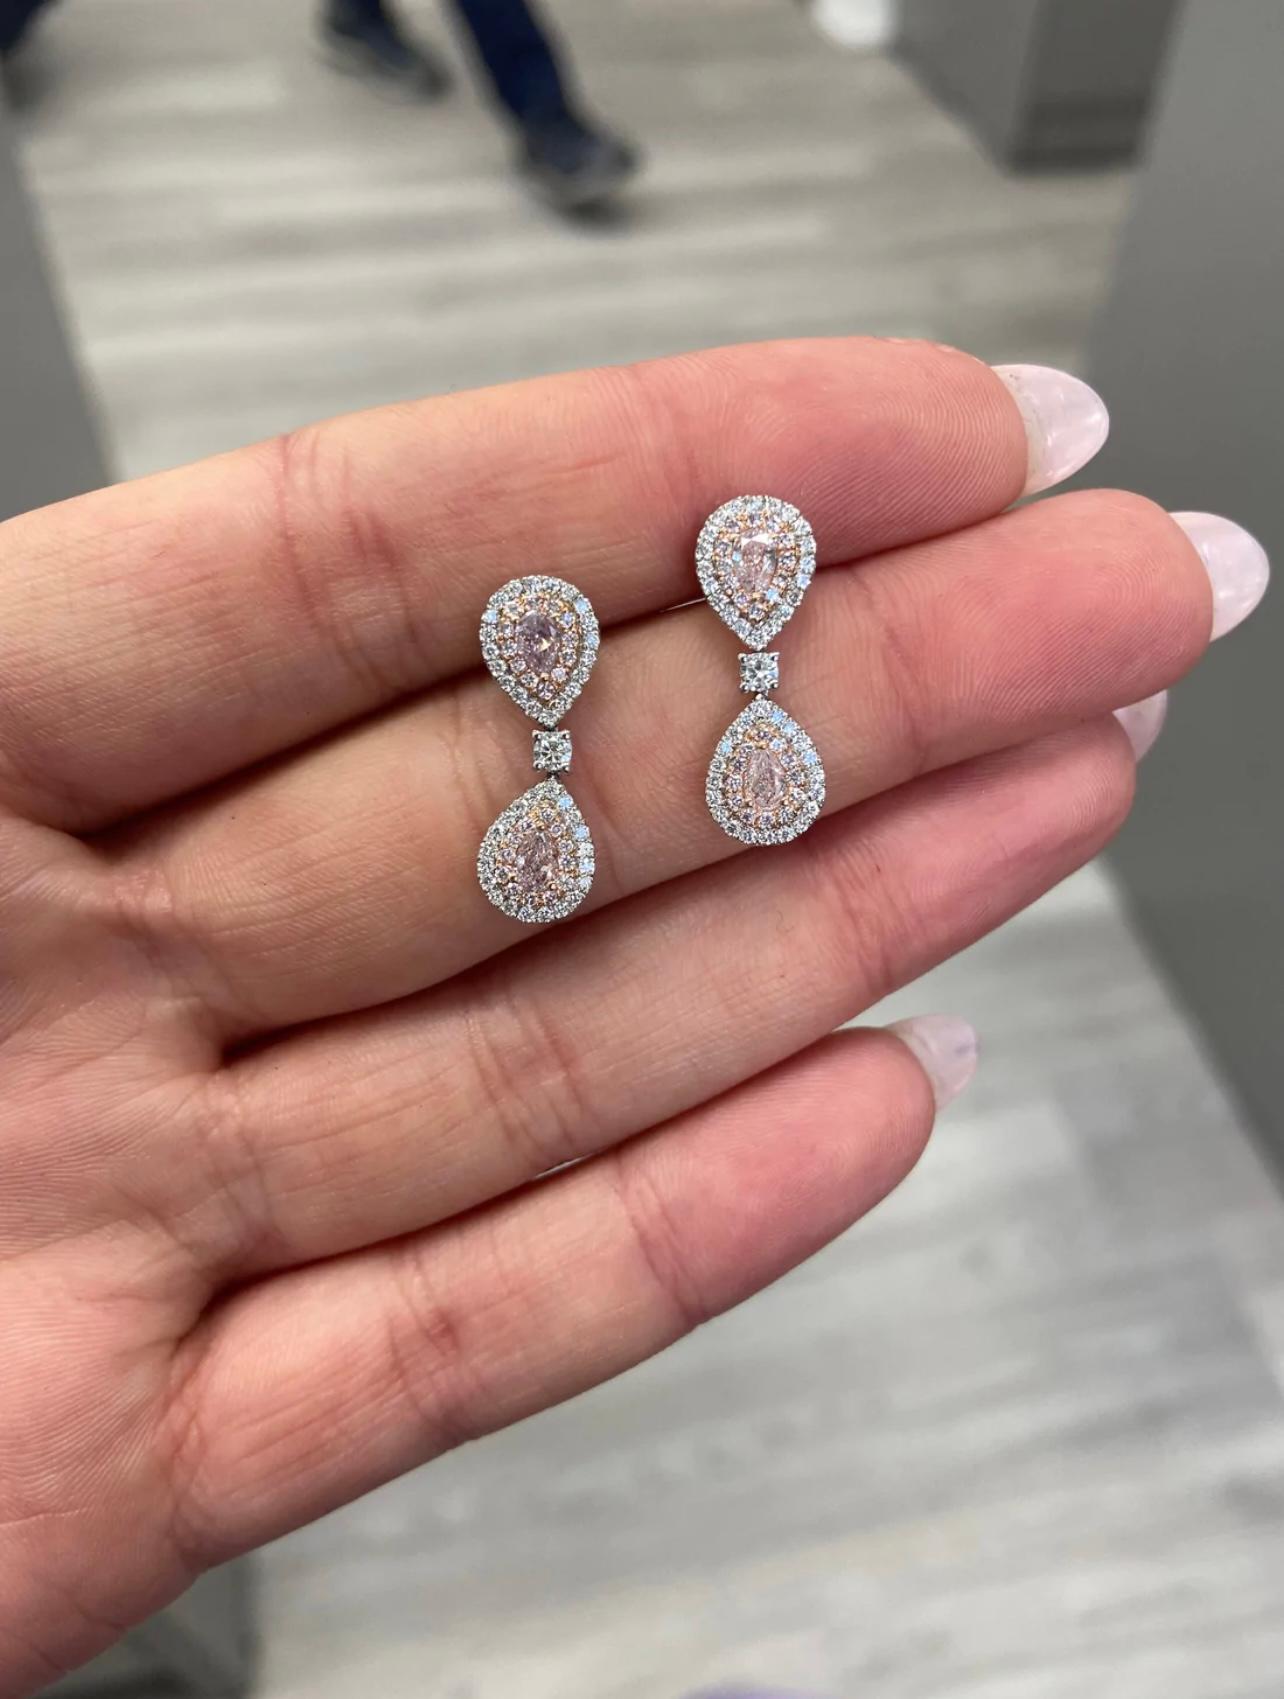 Natural Light Pink Diamond earrings
4 Pear Shapes
VS-SI1 Clarity 
Handset in 18k White Gold 
Double pink and white diamond halo 
1.20 total diamond carat weight